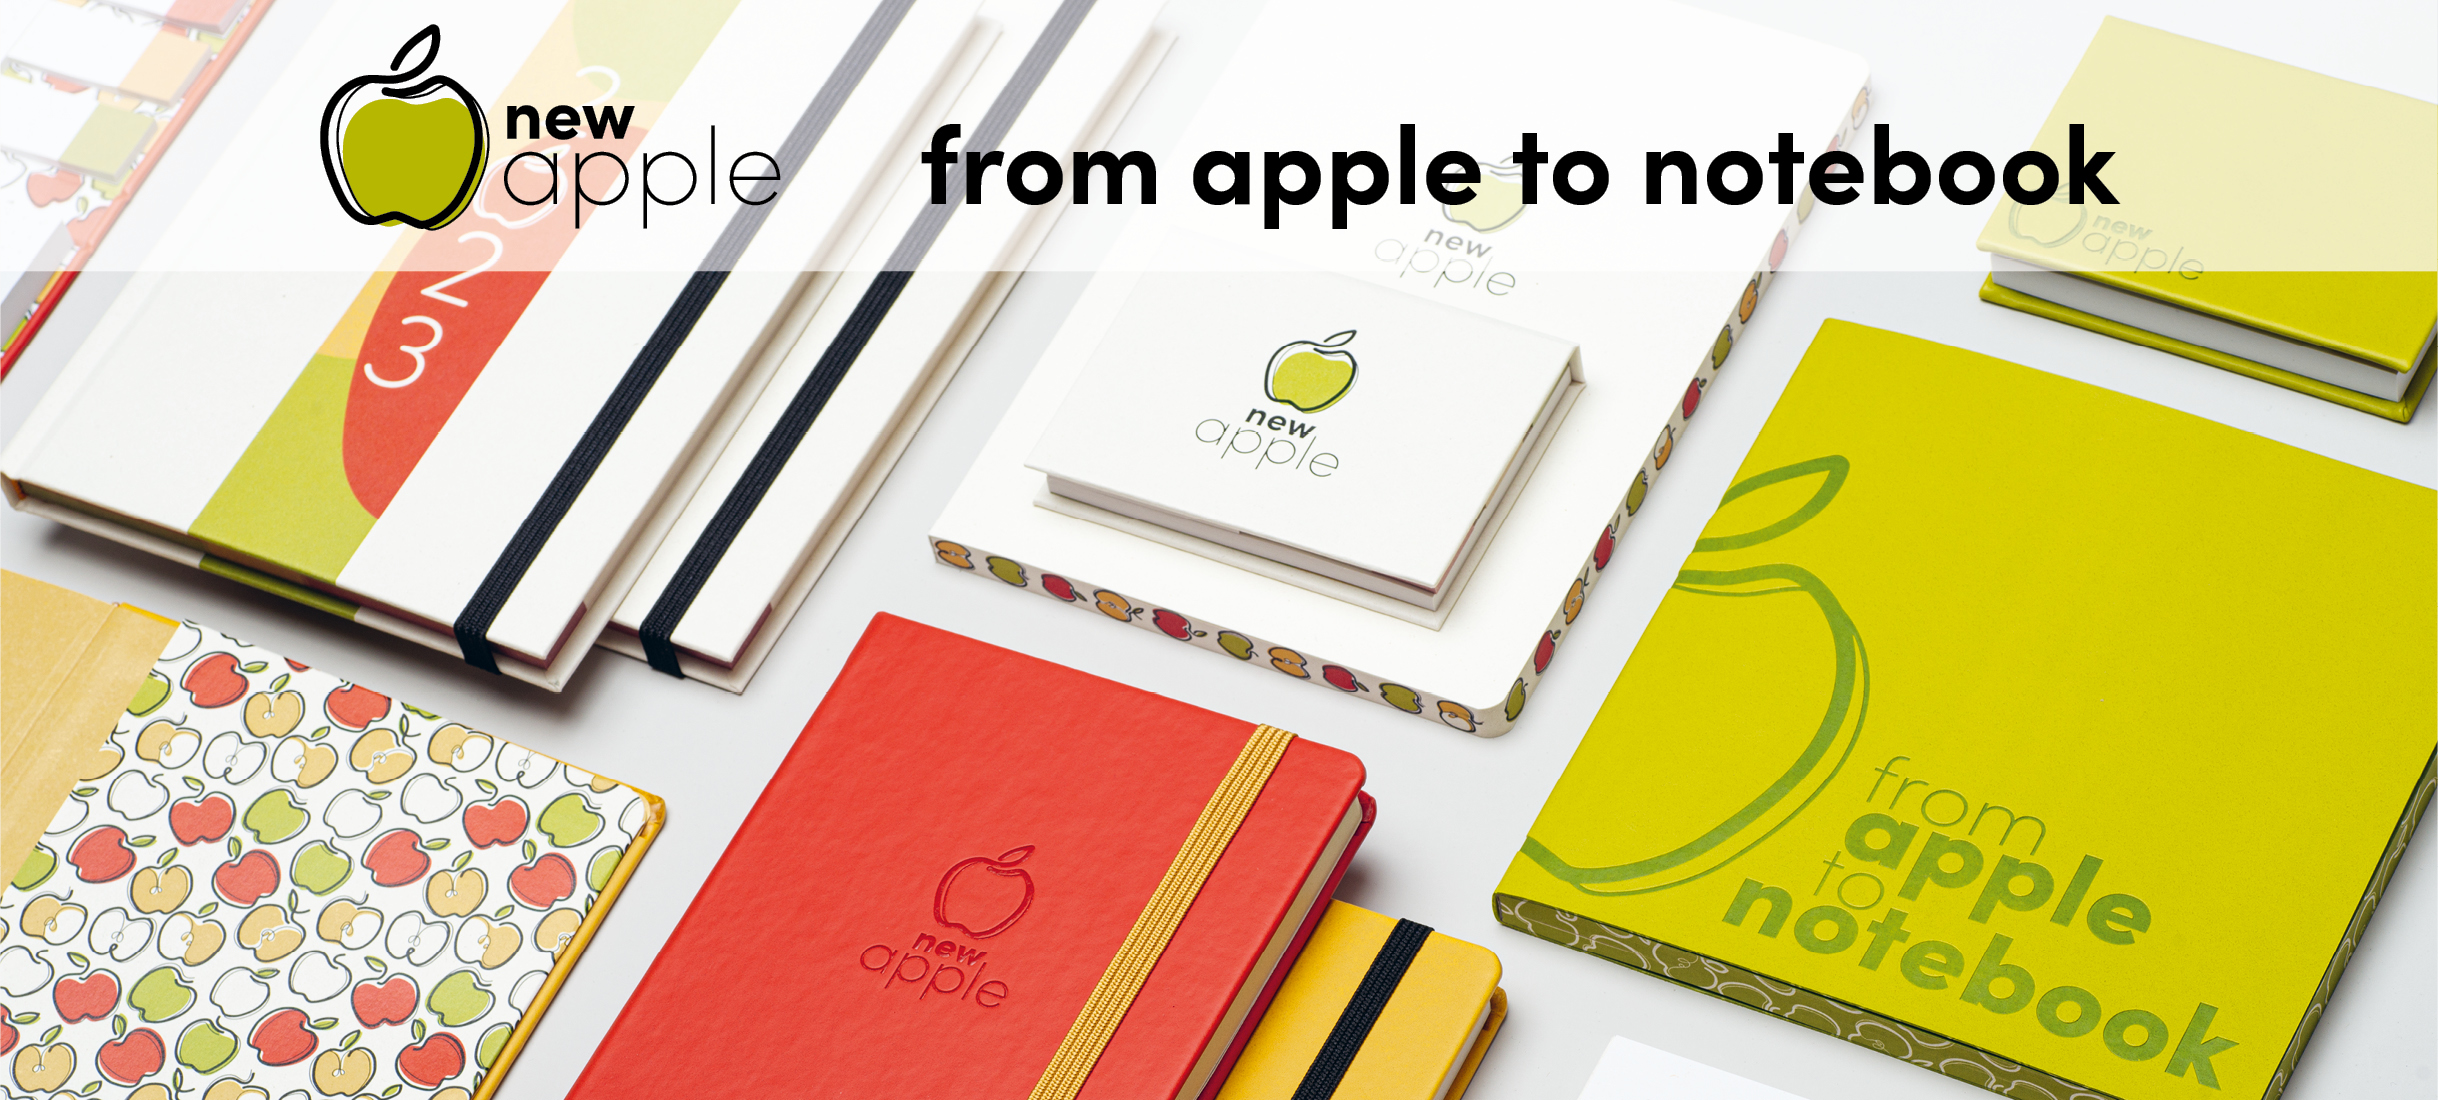 Newapple – from apple to notebook